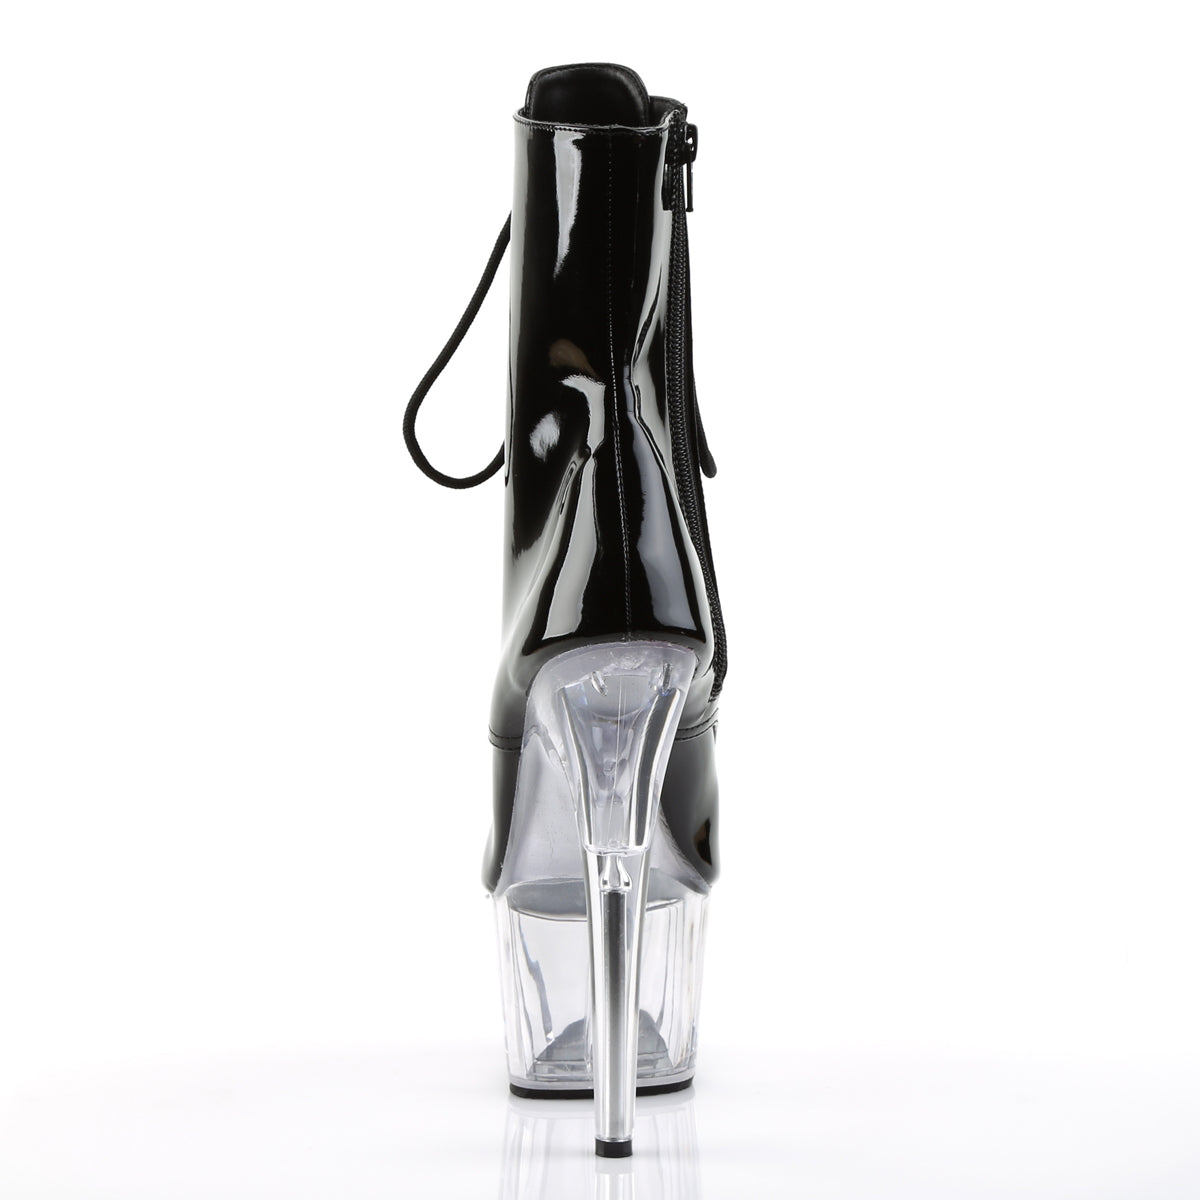 ADORE-1021 7" Heel Black and Clear Pole Dancing Ankle Boots-Pleaser- Sexy Shoes Fetish Footwear